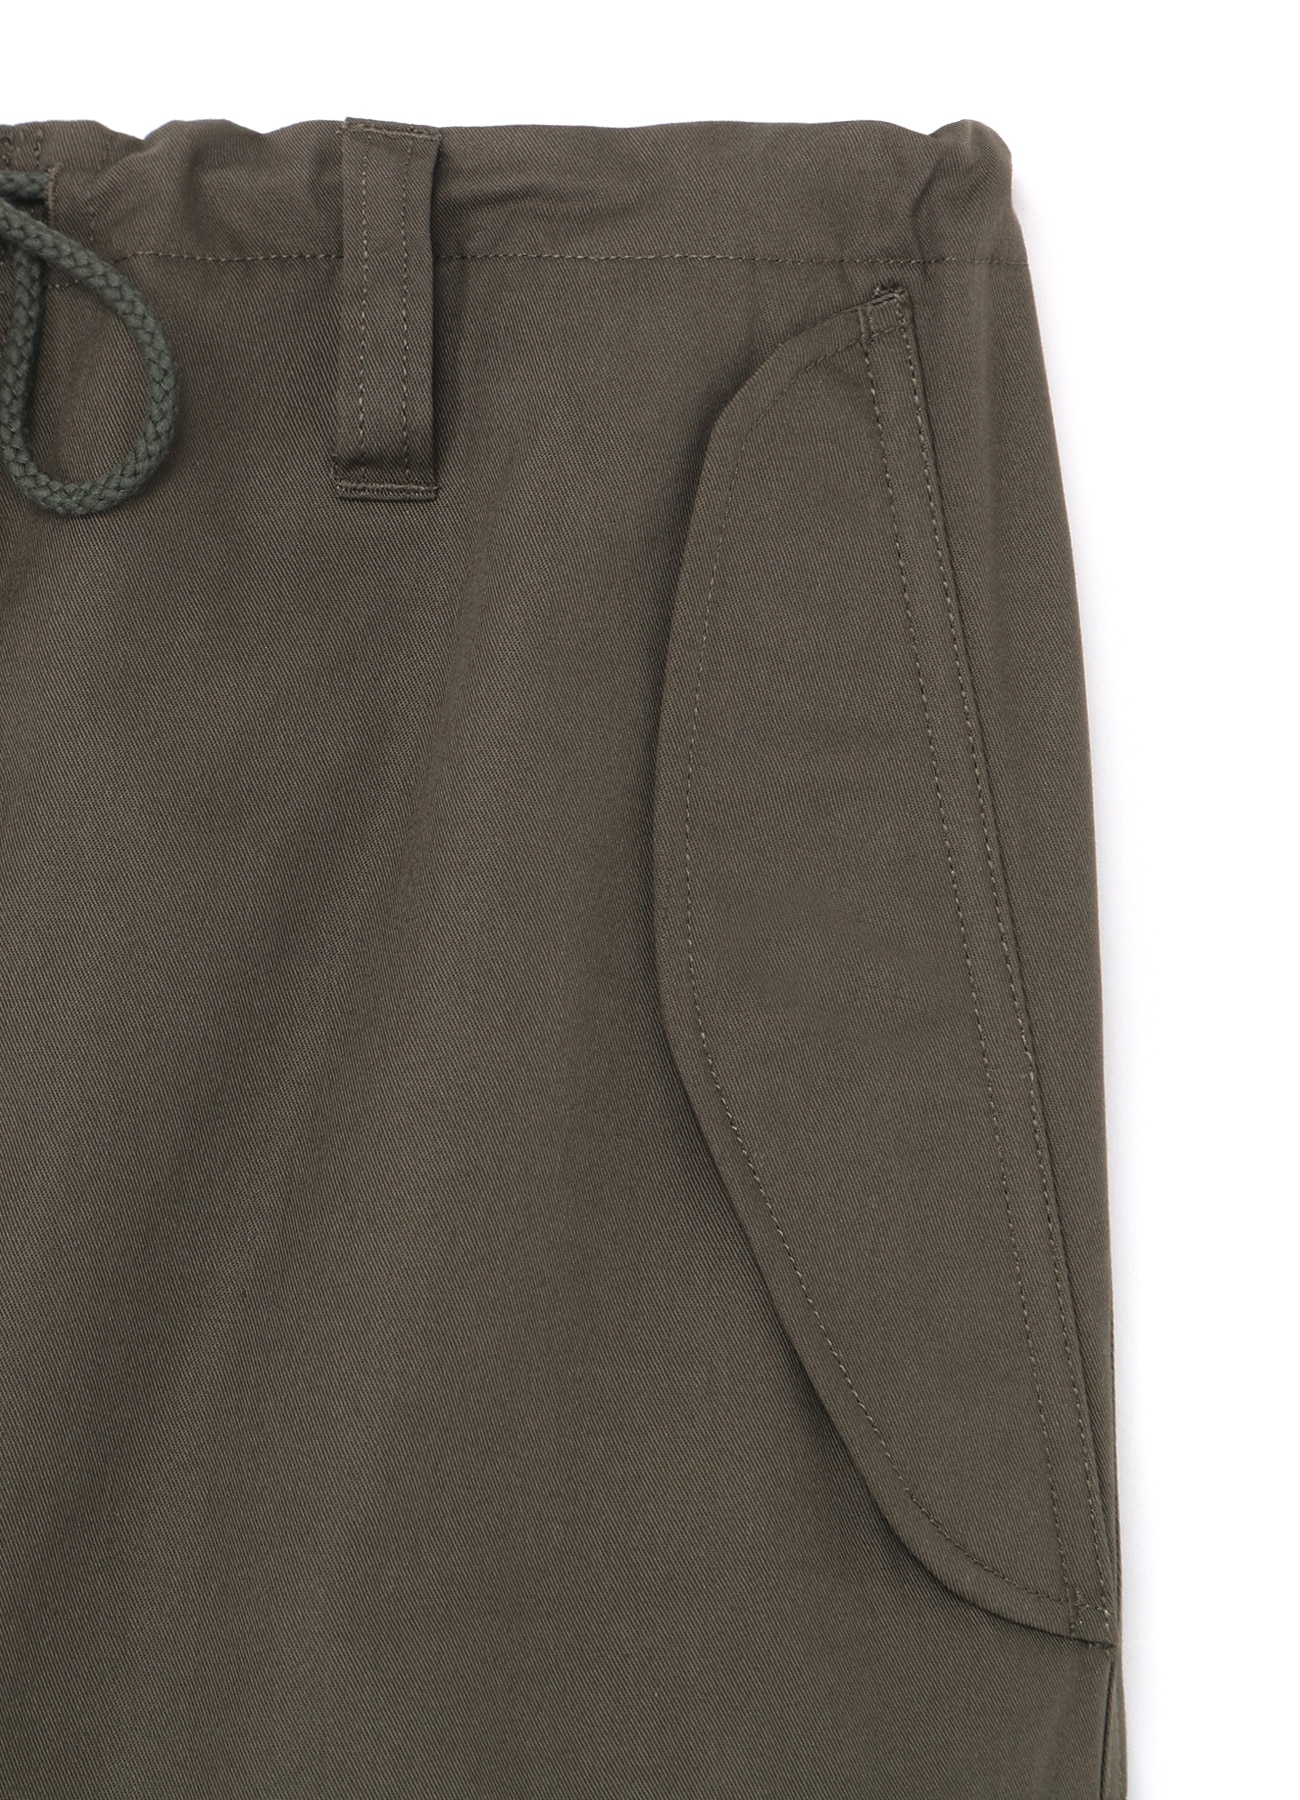 POLYESTER/COTTON TWILL CARGO PANTS(S KHAKI): Y's for men｜WILDSIDE